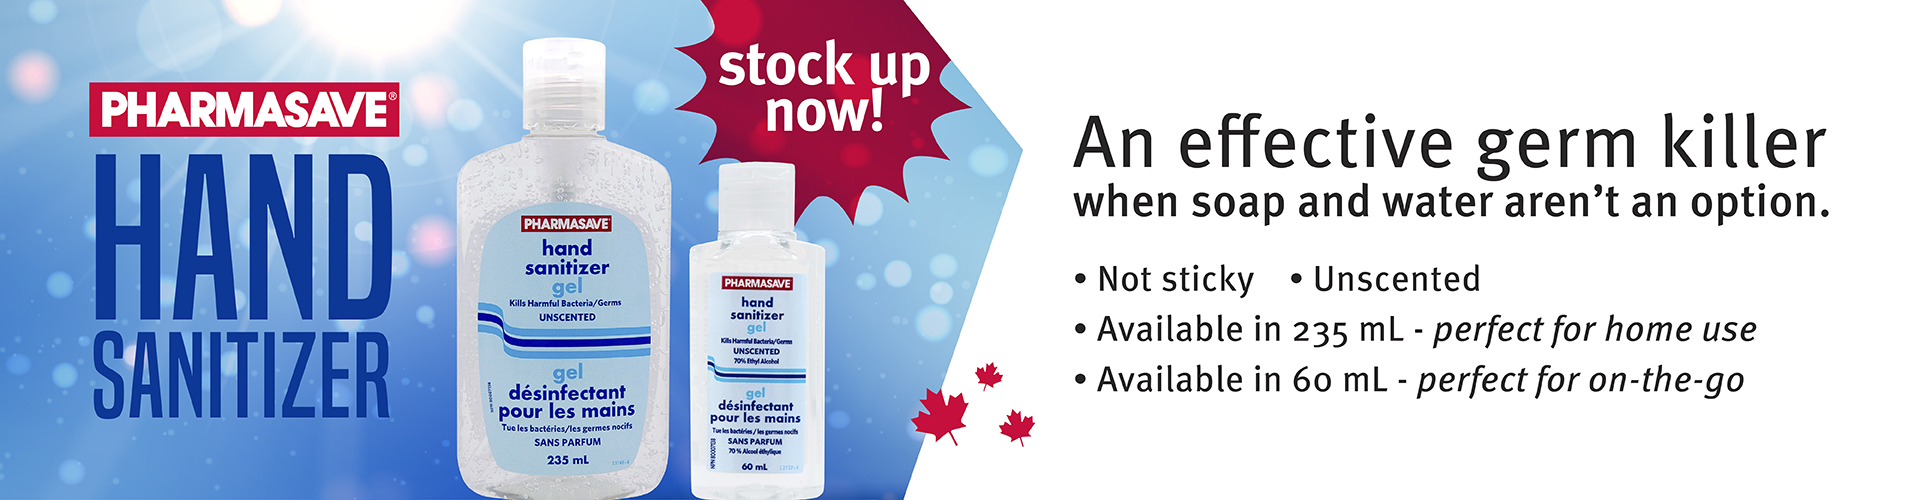 Pharmasave Brand hand sanitizer is an effective alternative when soap and water aren't available.